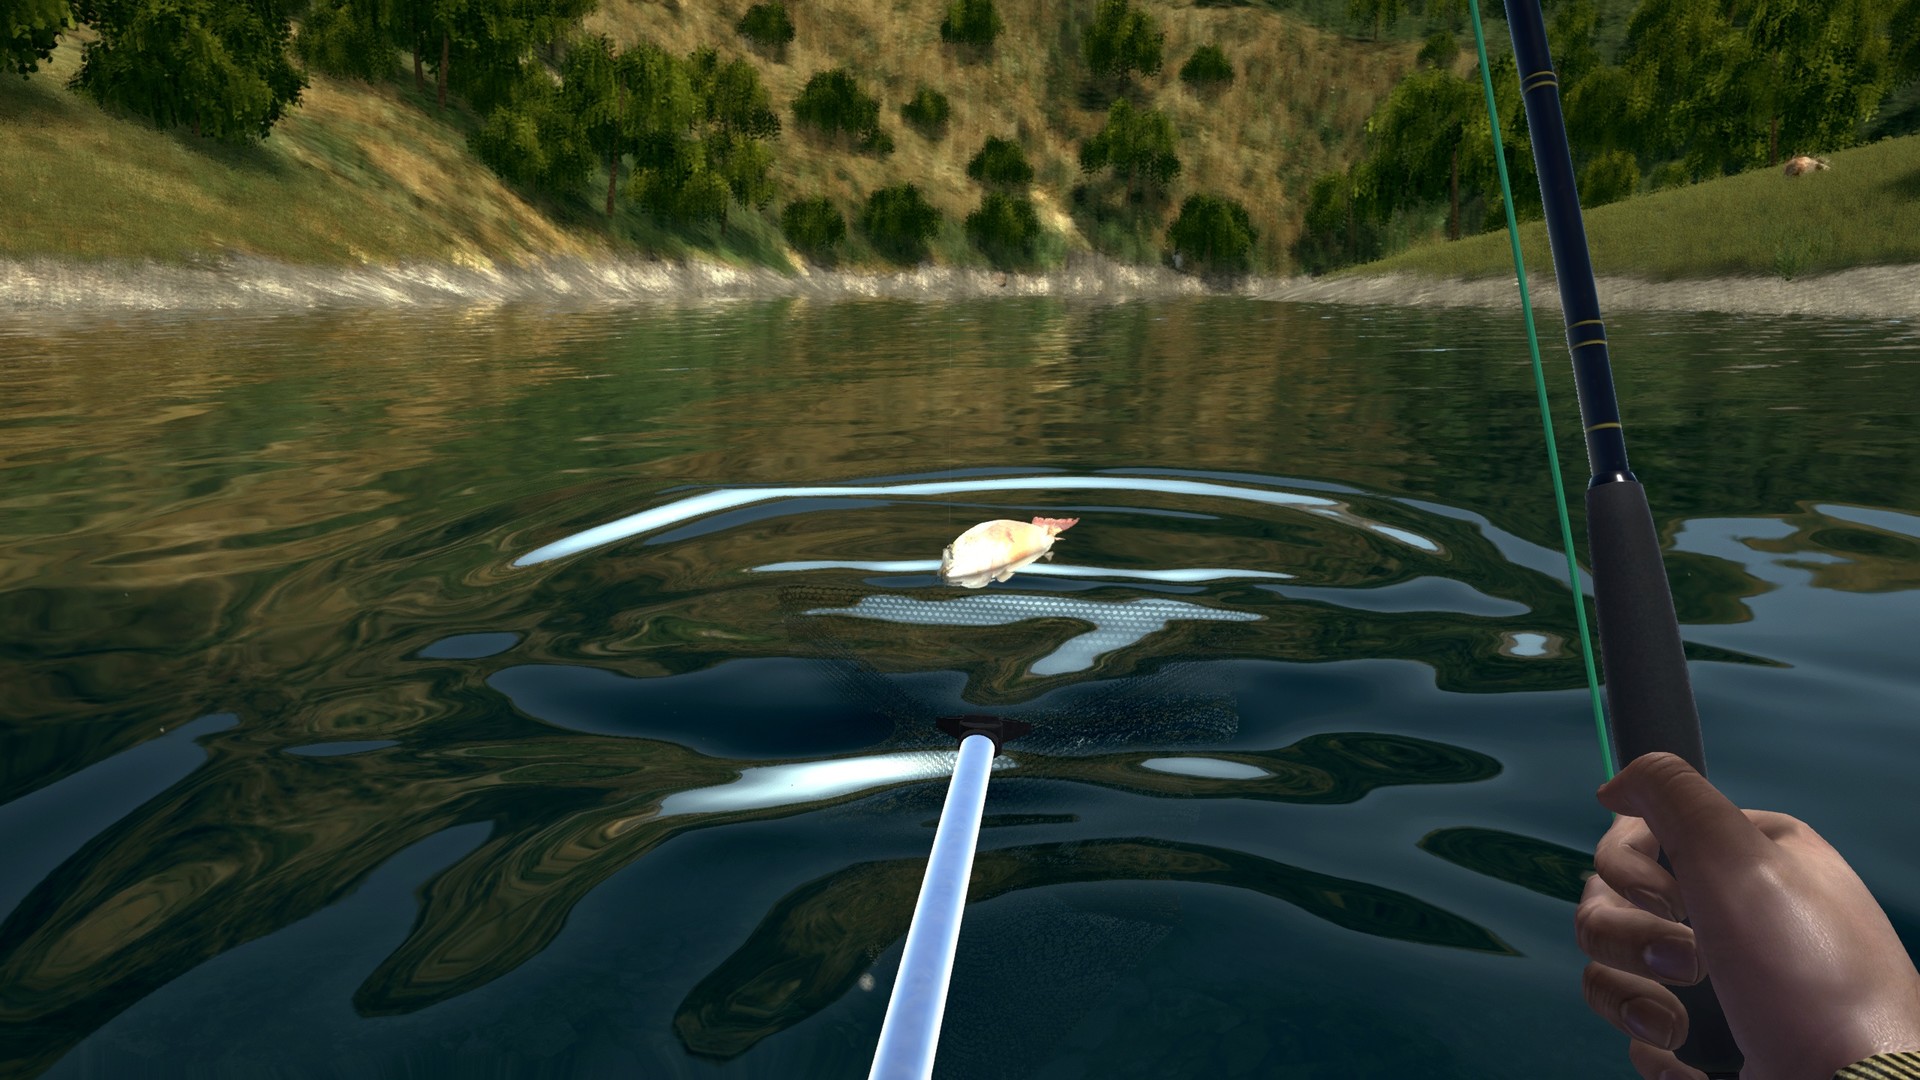 Ultimate Games - 📣 Ultimate Fishing Simulator - XBOX update 1.0.0.1    ⚠️ Release Notes - version 1.0.0.1 Fixes: - Fixed bug with wrong fishing rod  position after fishing under